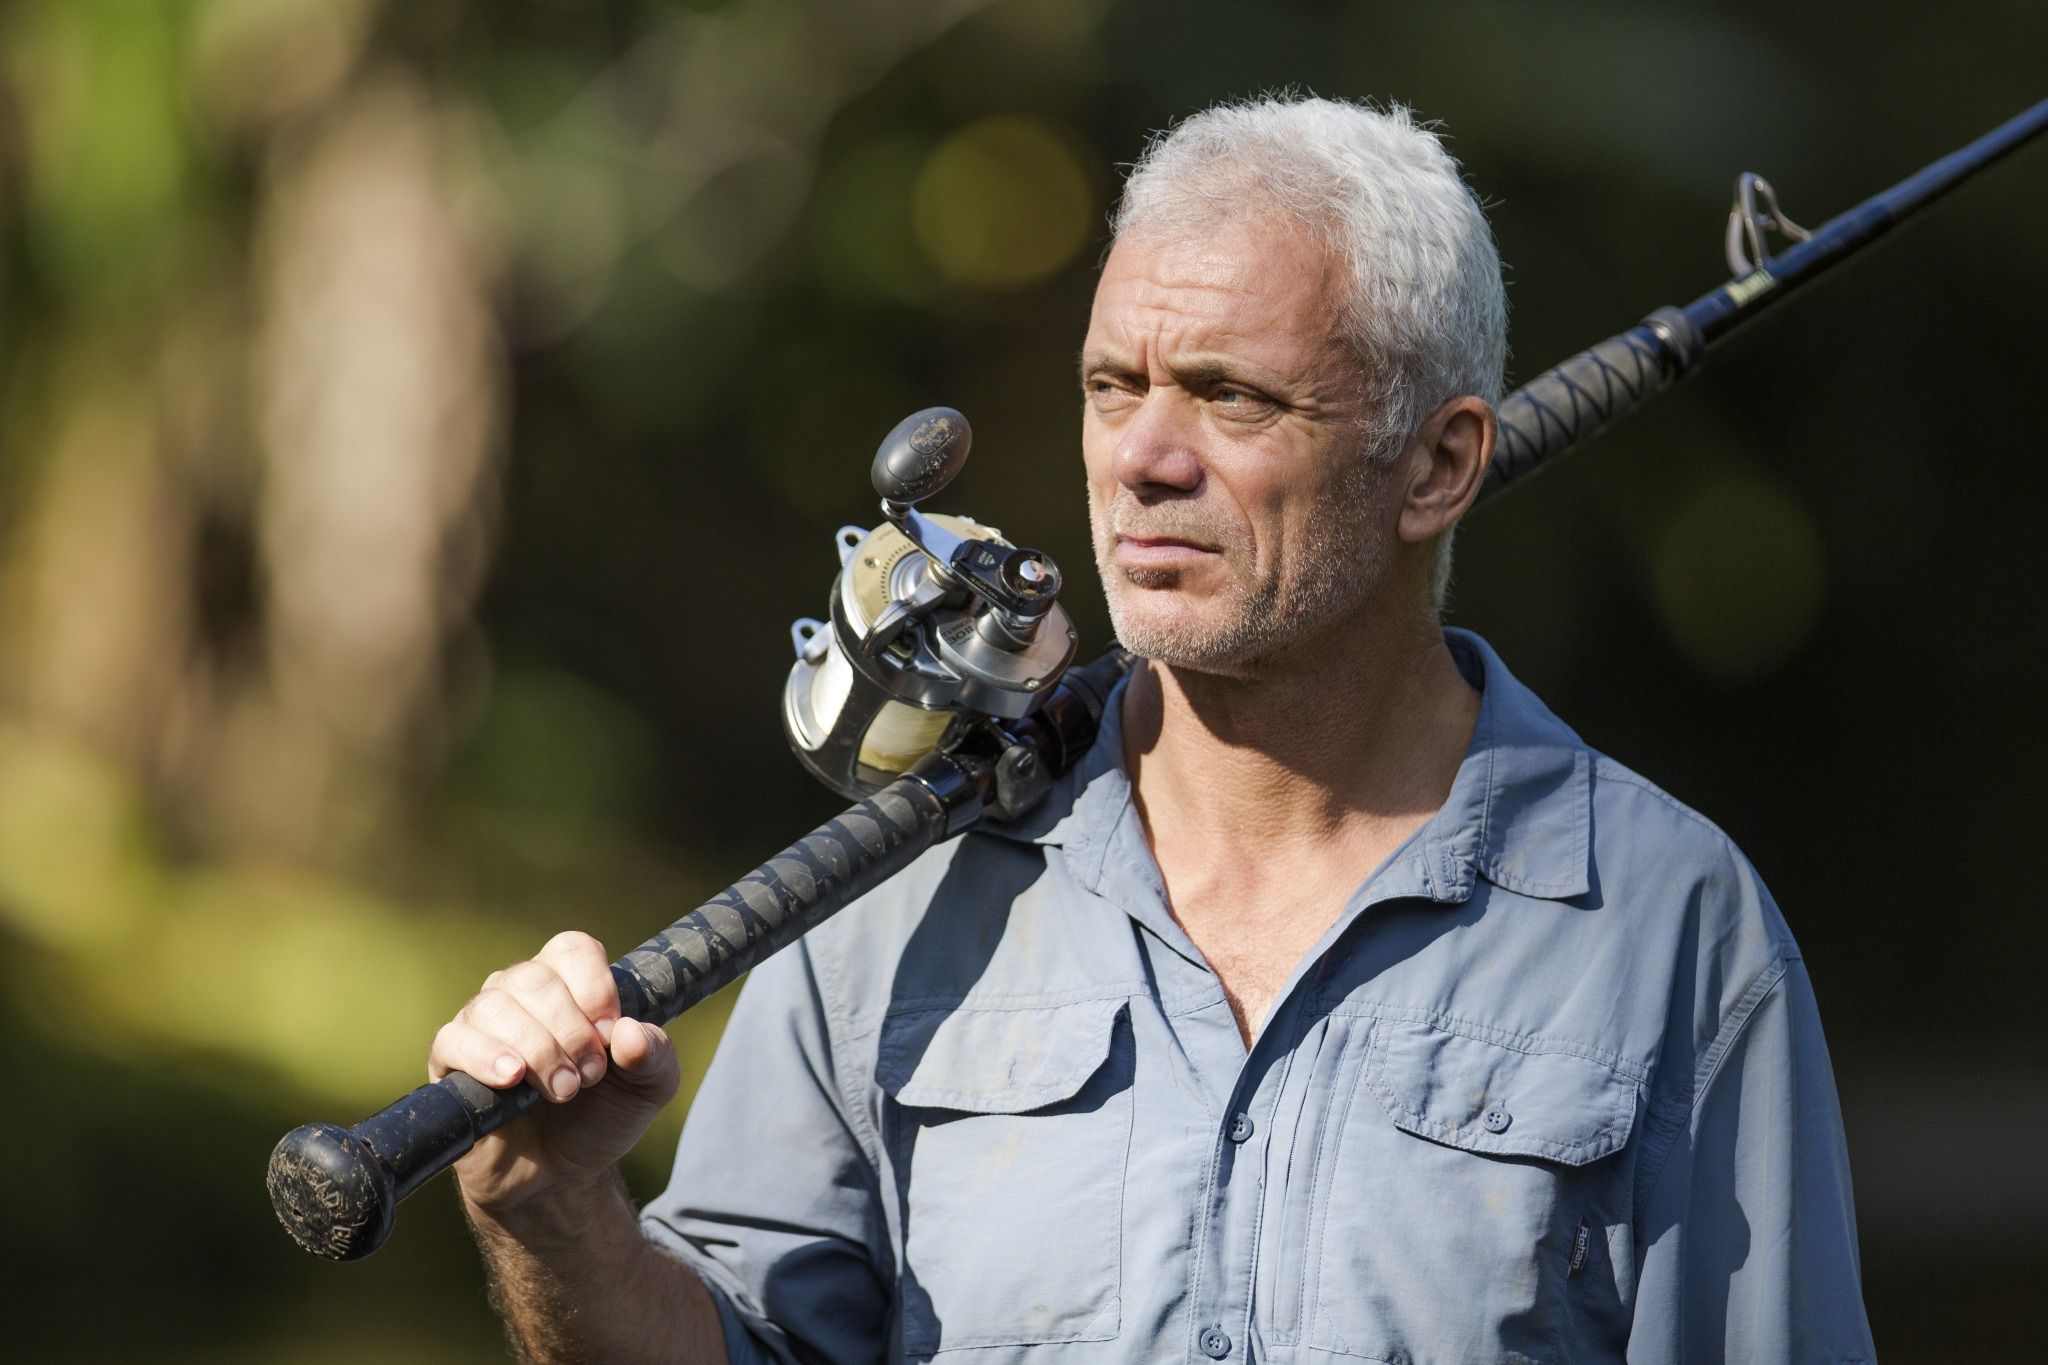 https://static1.srcdn.com/wordpress/wp-content/uploads/2018/04/Jeremy-Wade-from-River-Monsters-with-a-fishing-pole.jpg